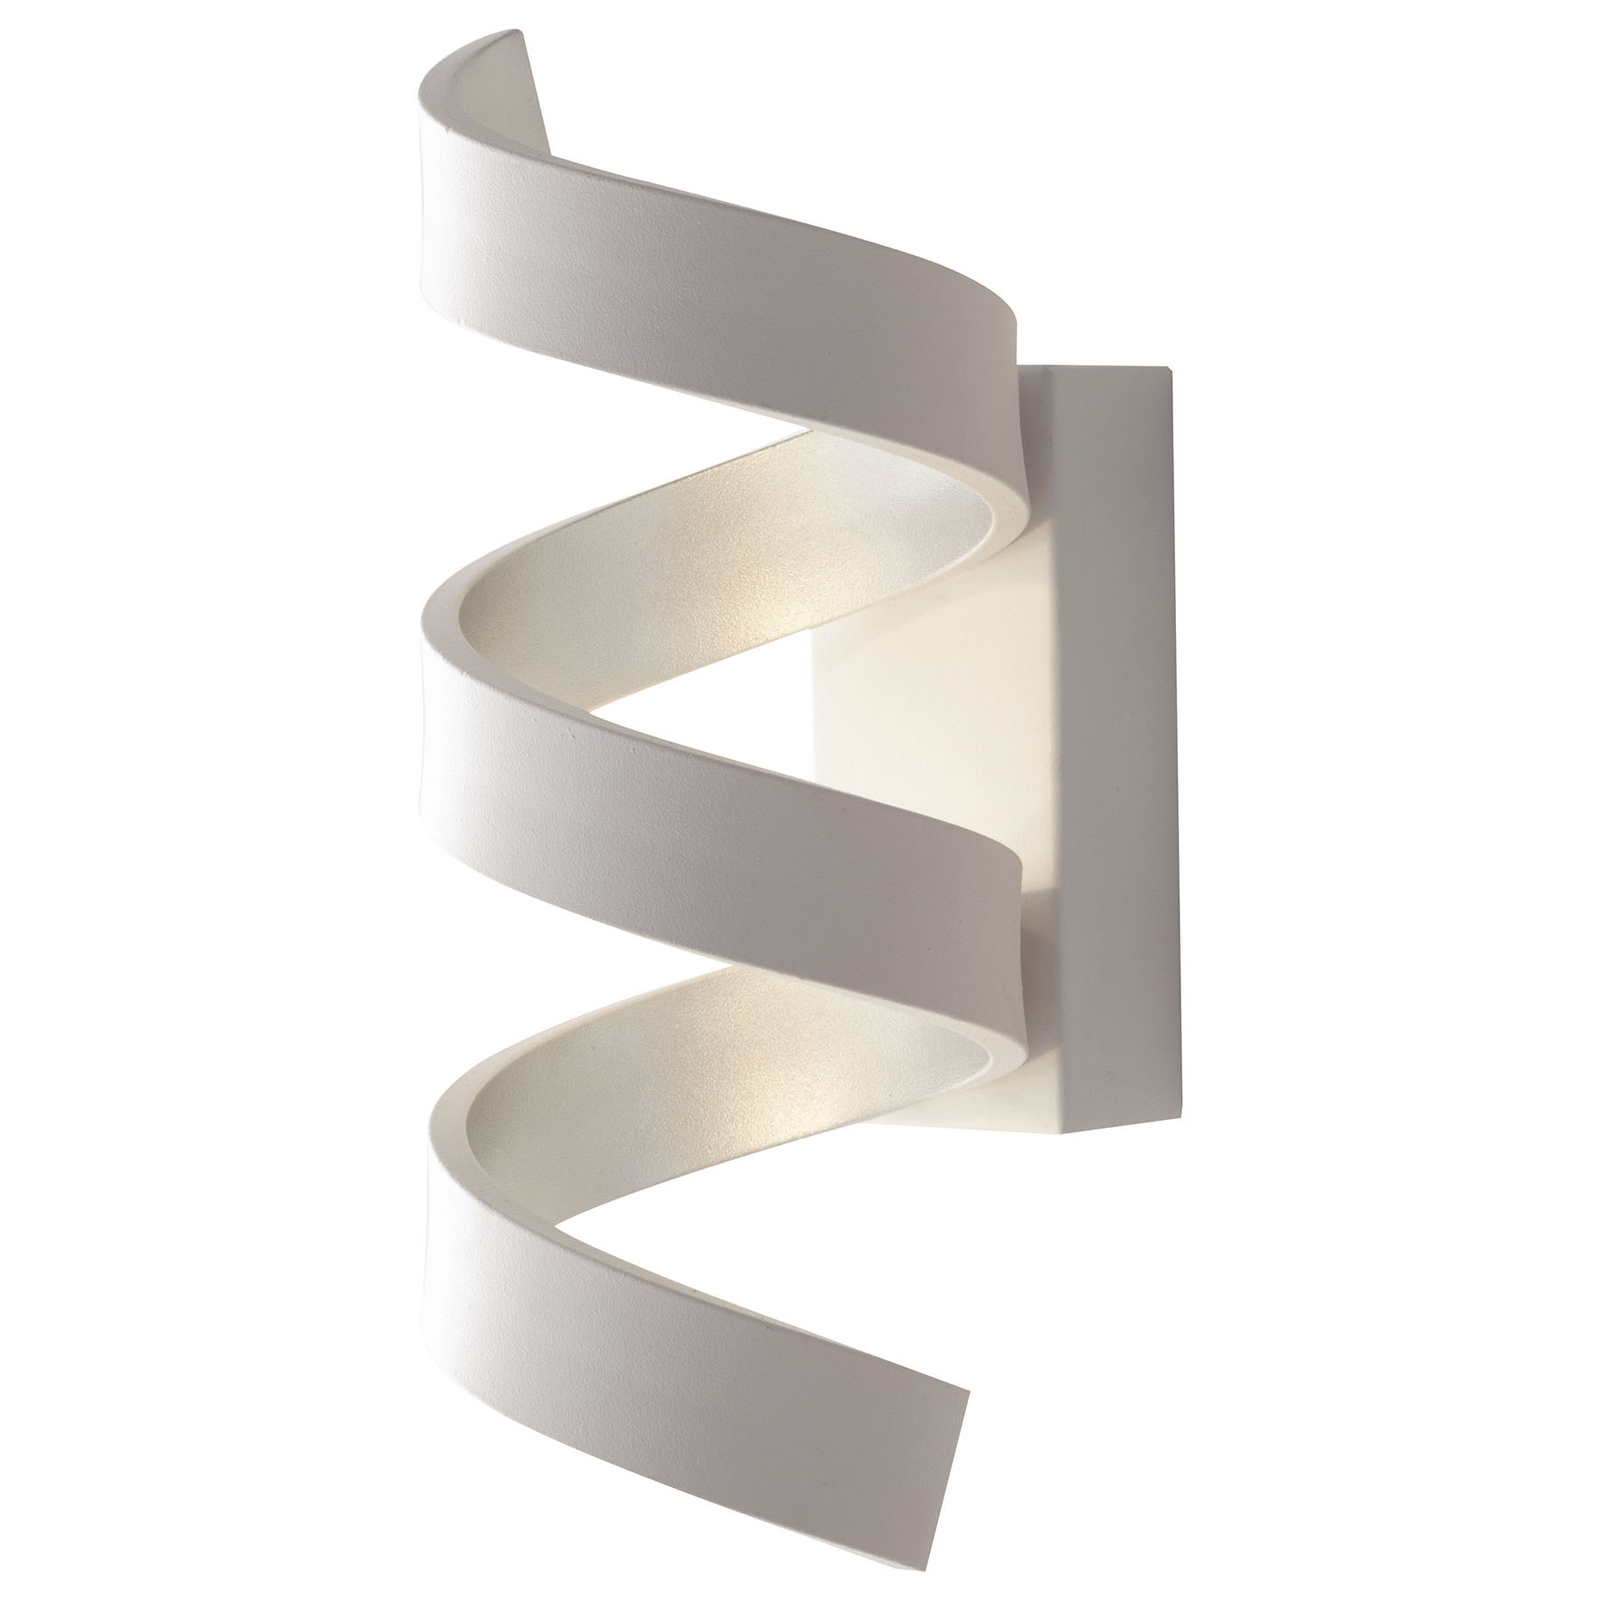 Helix LED wall light white and silver height 26 cm